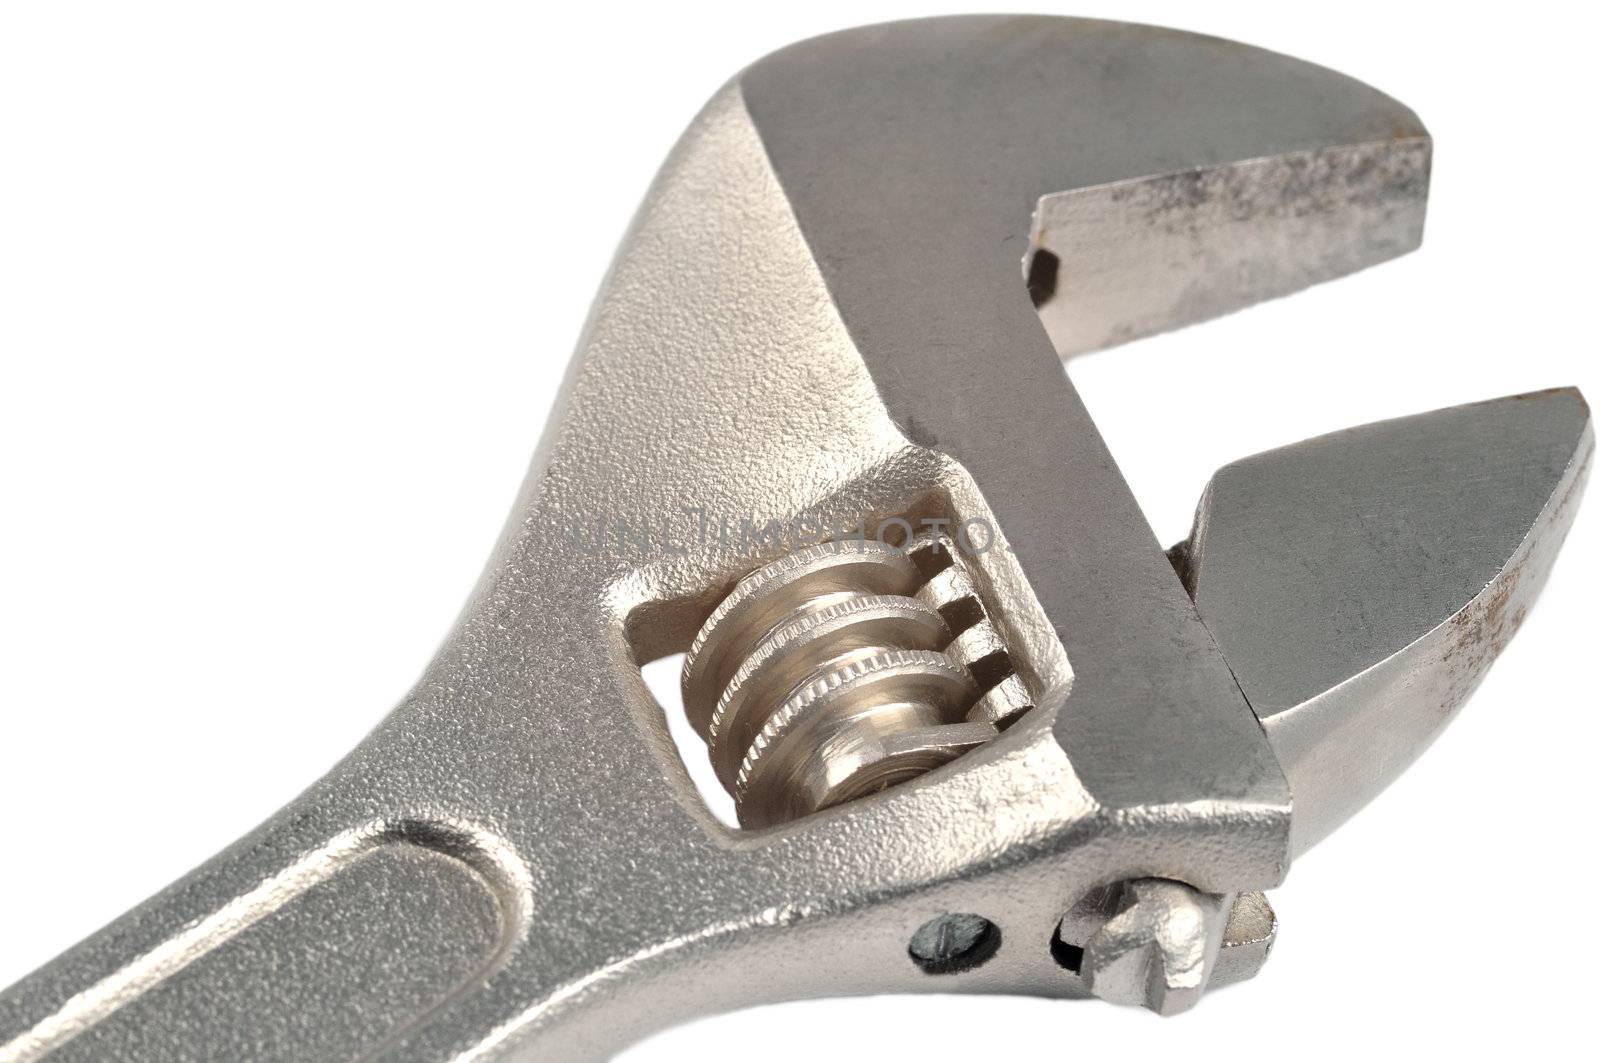 Closeup of a wrench on a white background